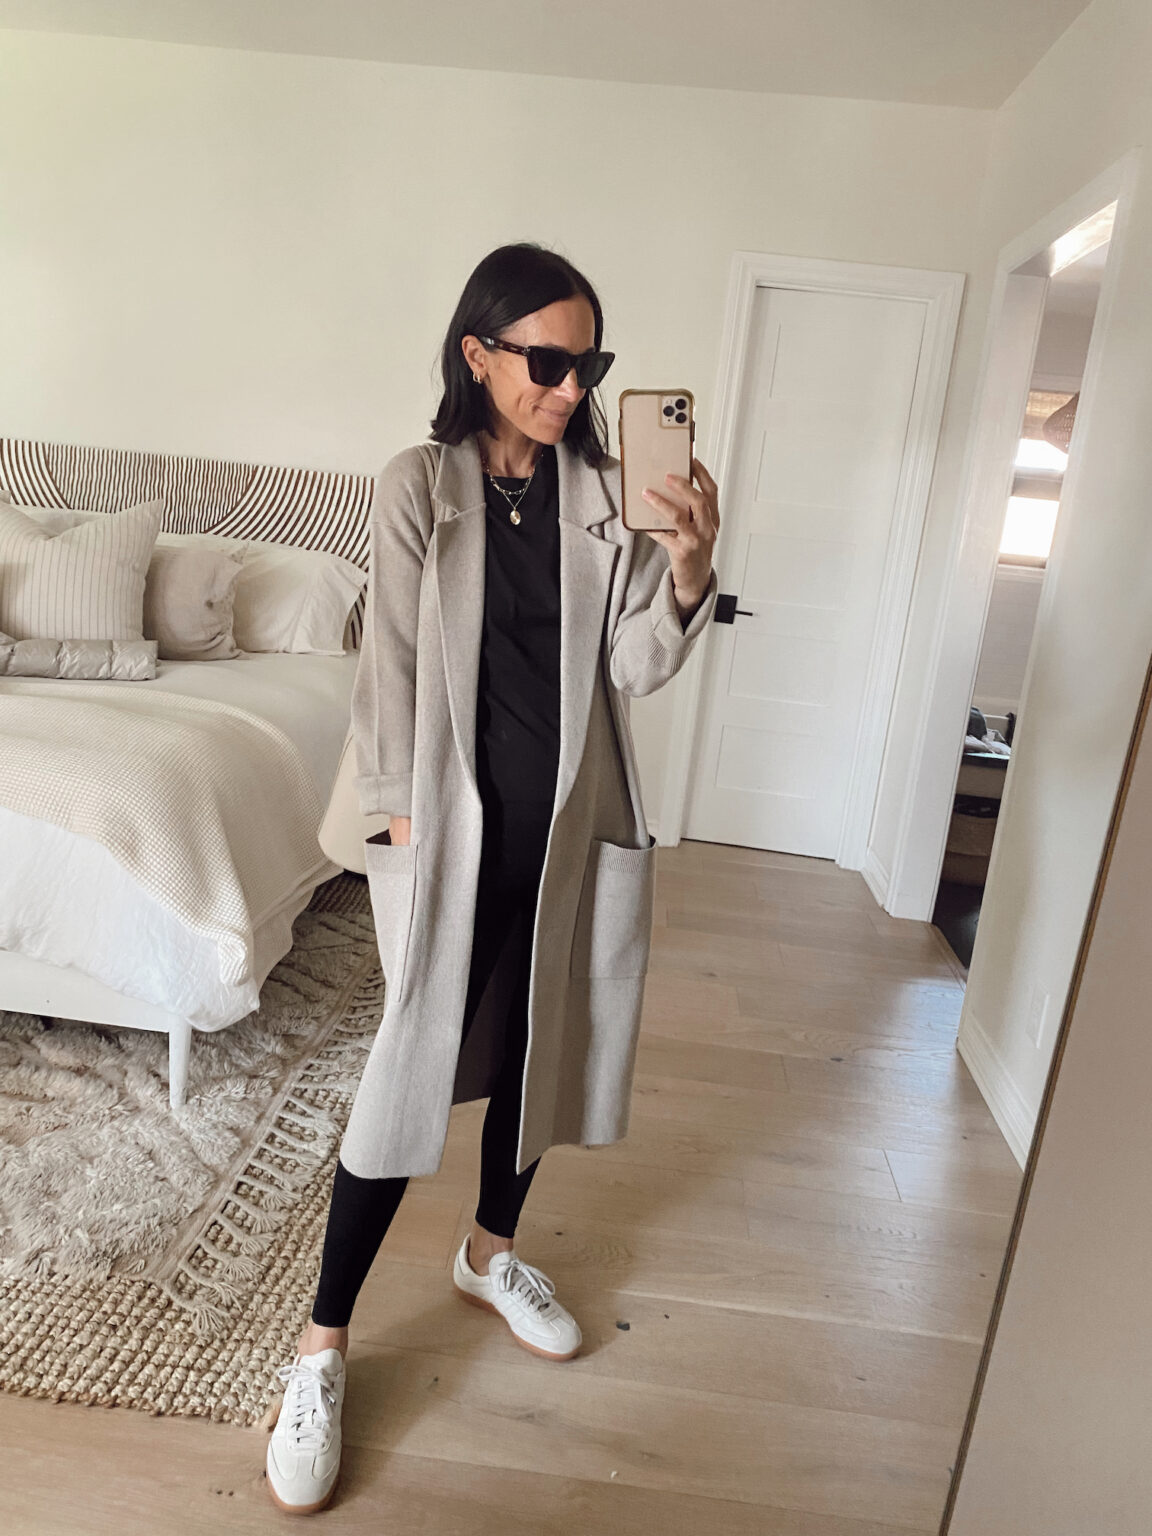 31 Styled Outfits From October's Capsule Wardrobe - Capsule wardrobe ...